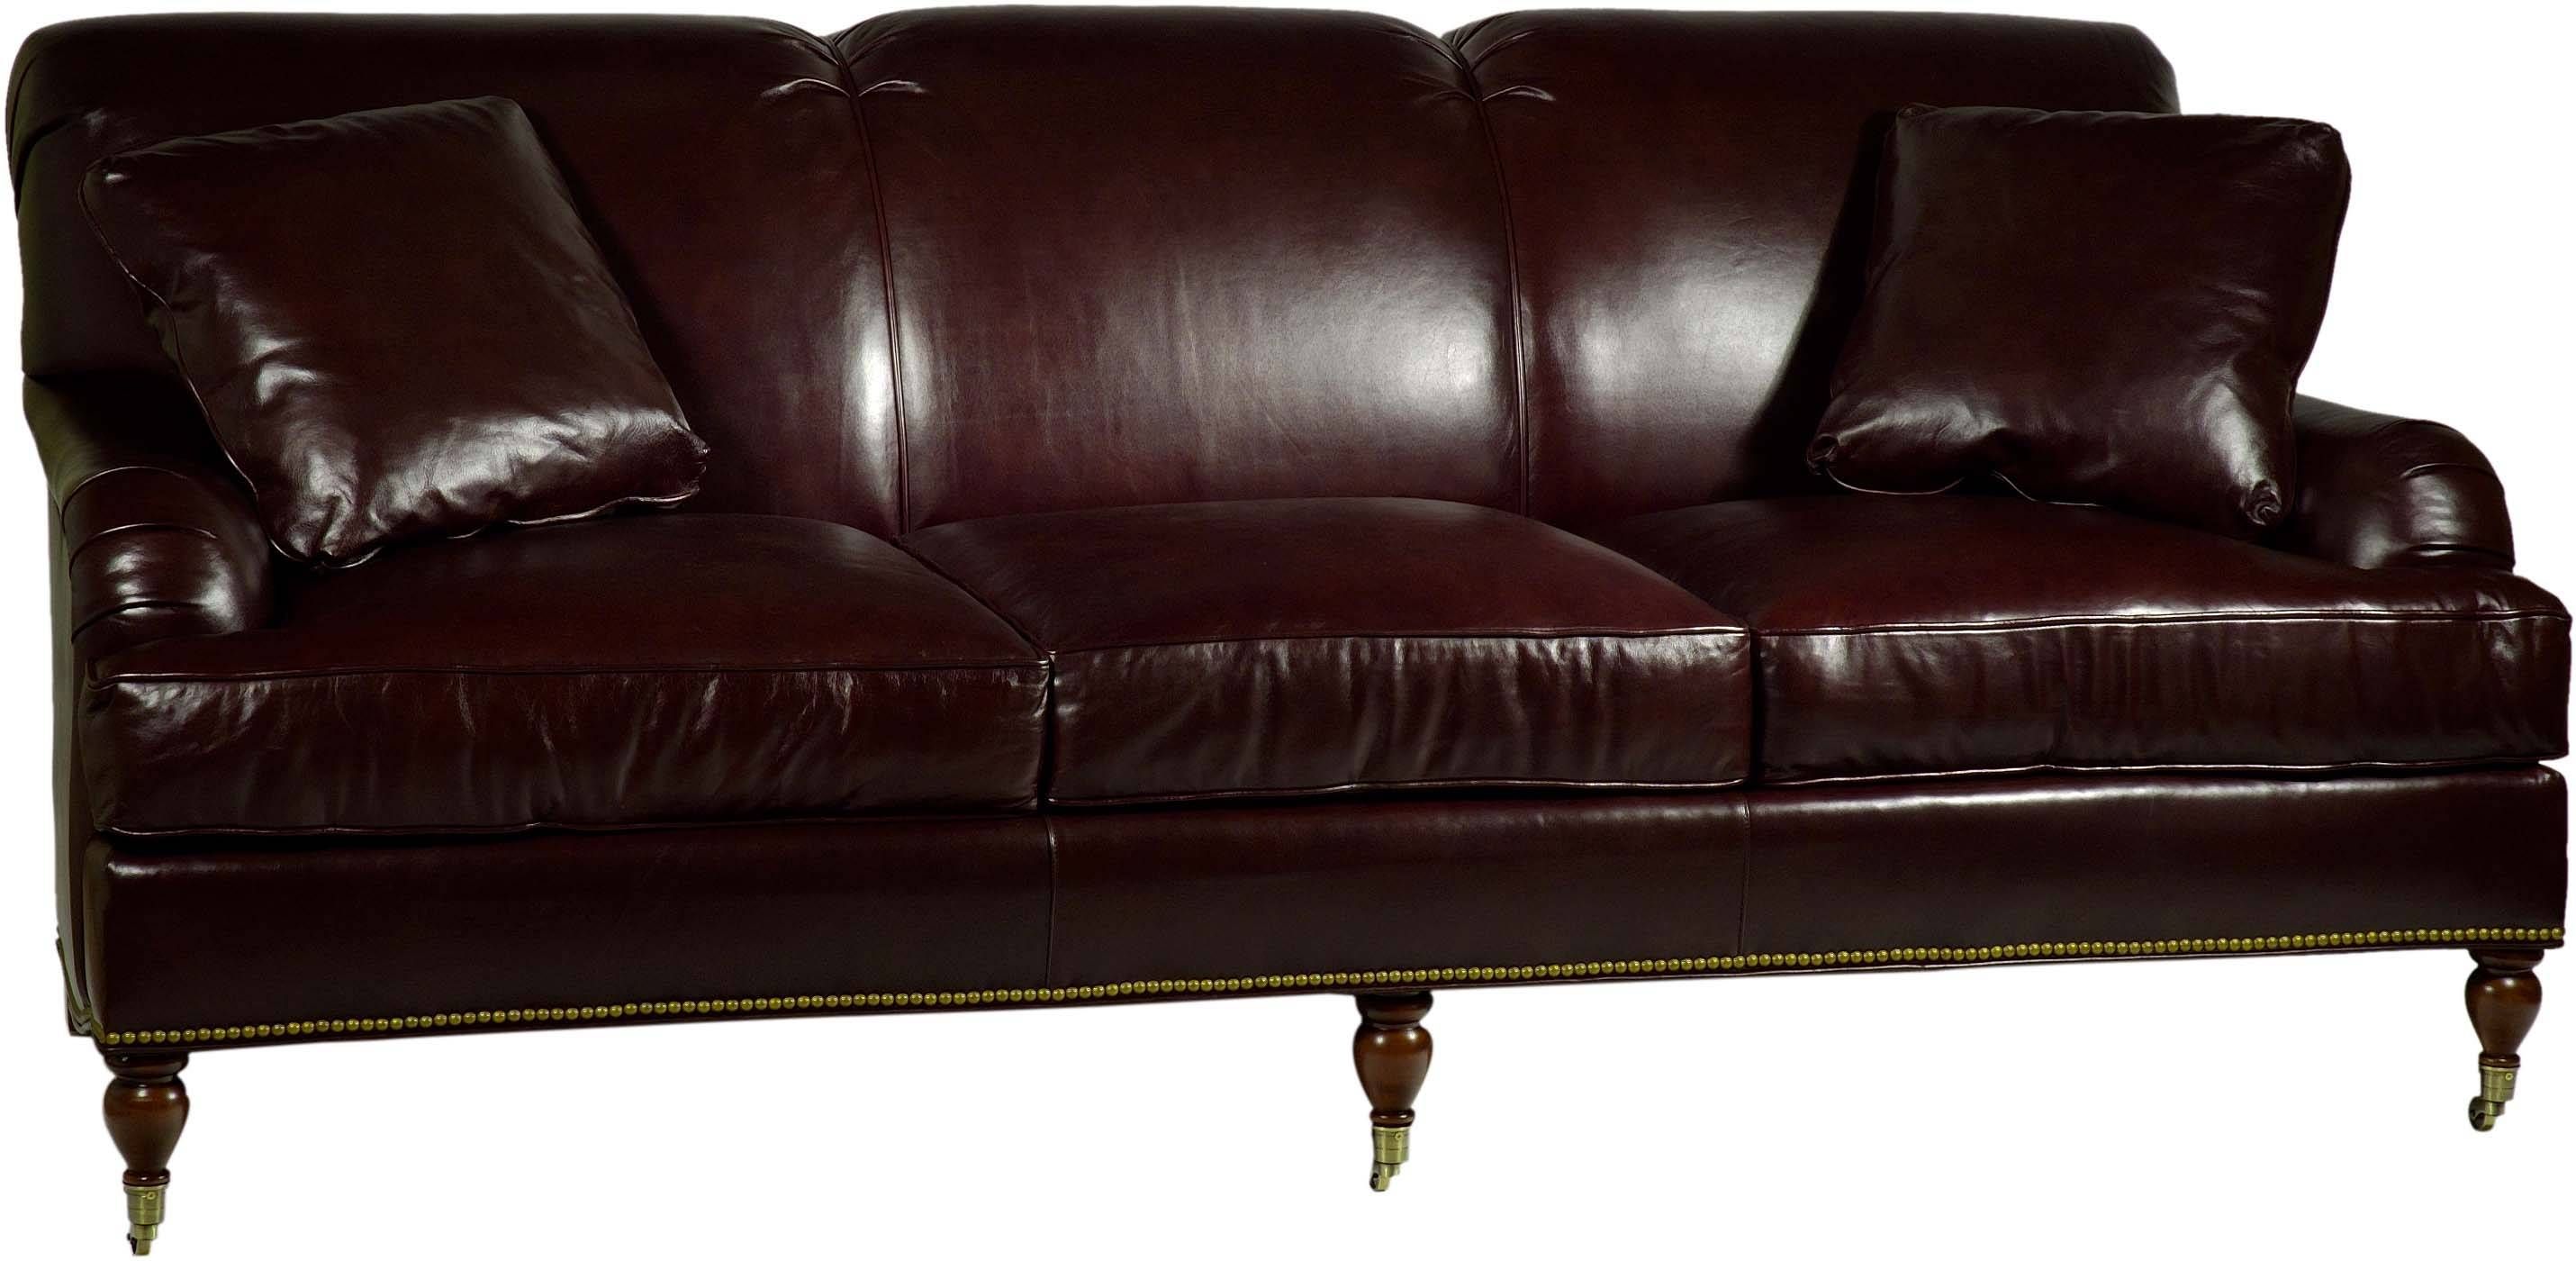 Decoration Sofa In English With Beaumont Classic English Rolled Intended For Classic English Sofas (View 11 of 30)